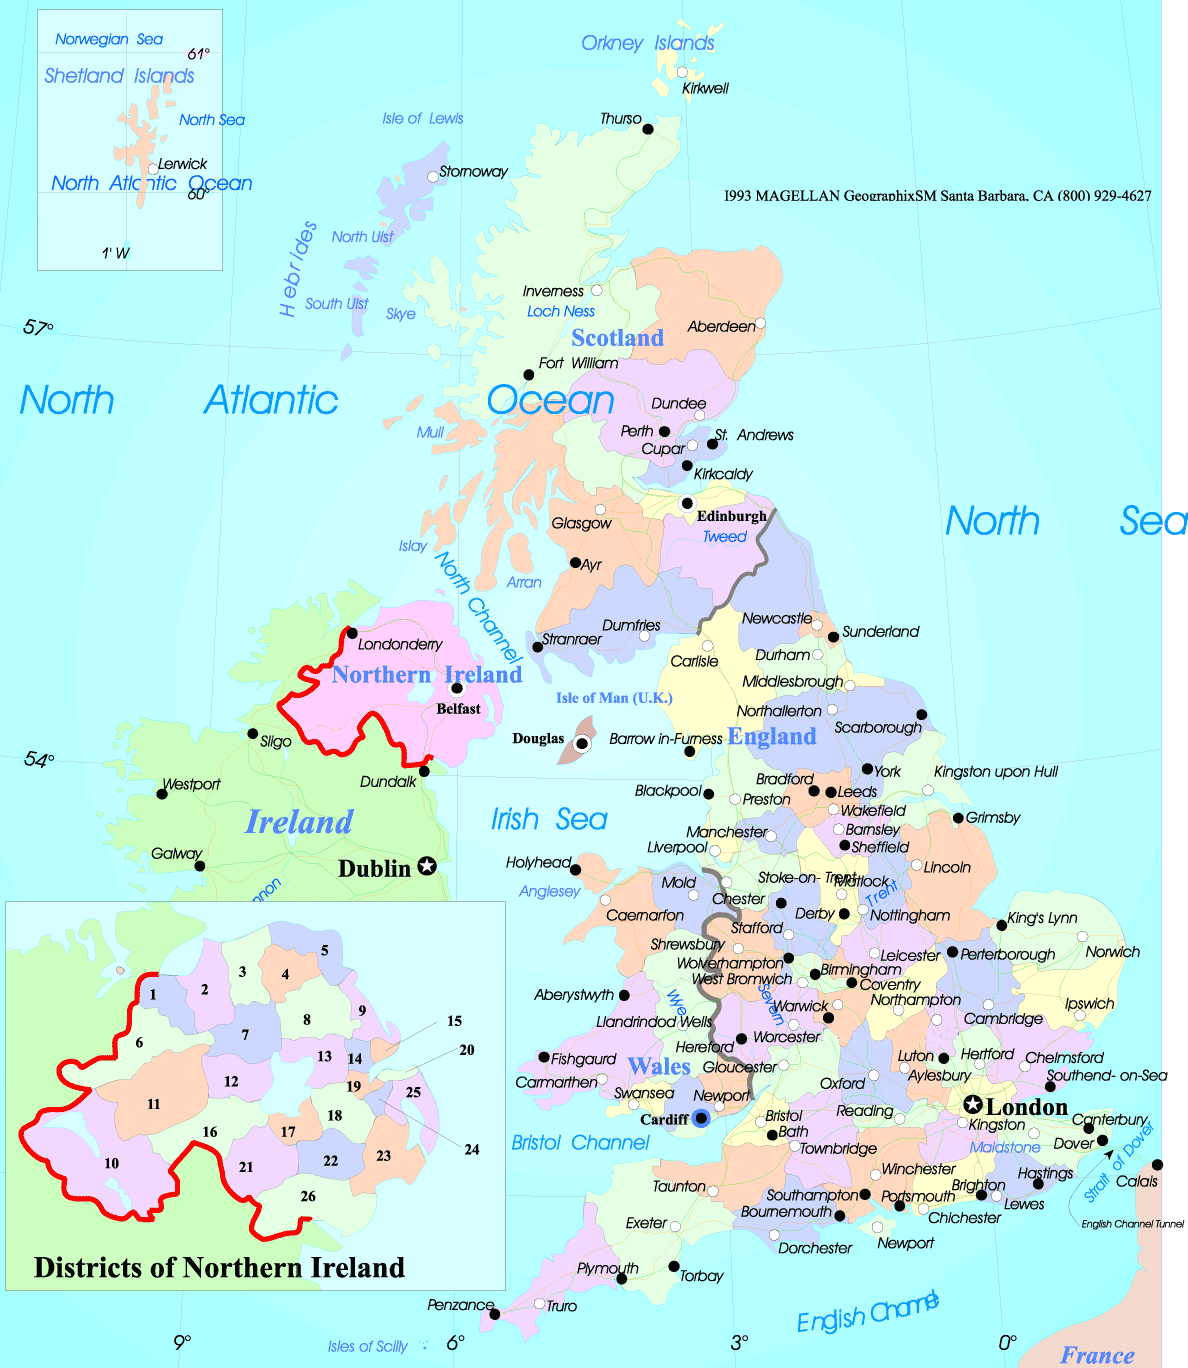 England Map on Europe Area Pictures | Map of England Cities